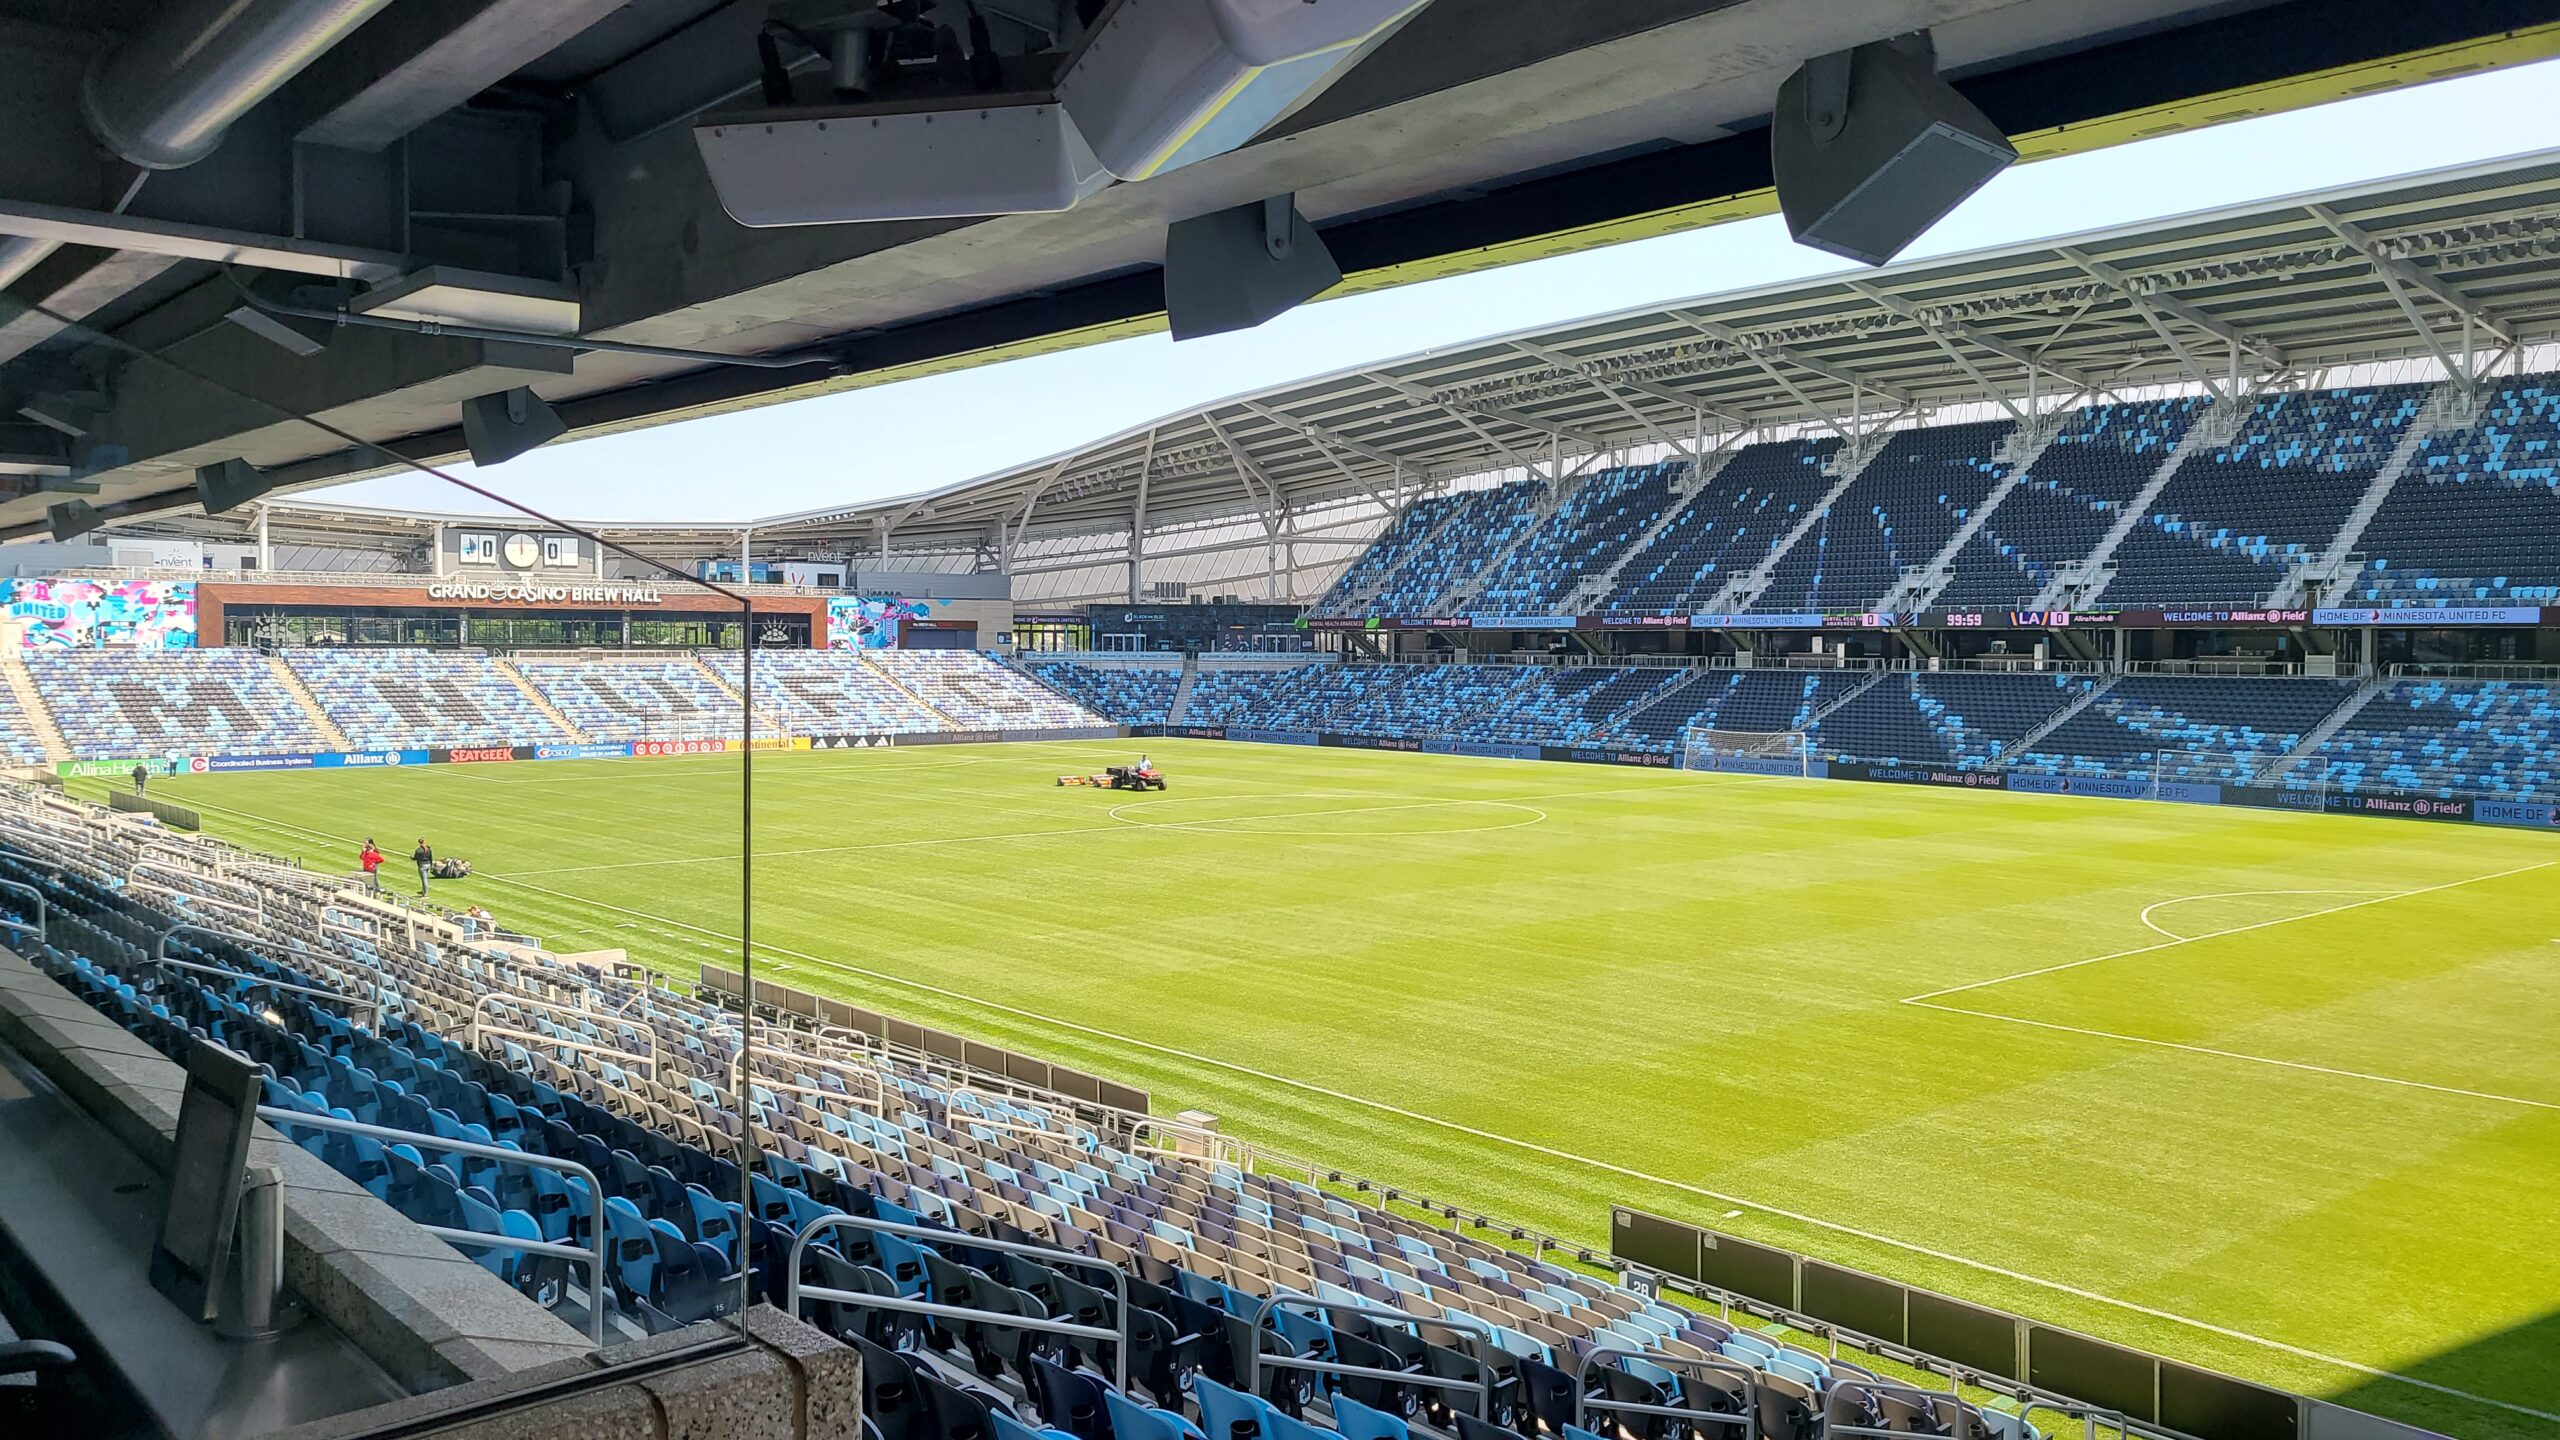 Allianz Field interior from the Southwest corner of the concourse: a lawn care tractor tends to the grass. The seats are empty. The Brew Hall and manual clock/scoreboard are in the distance.